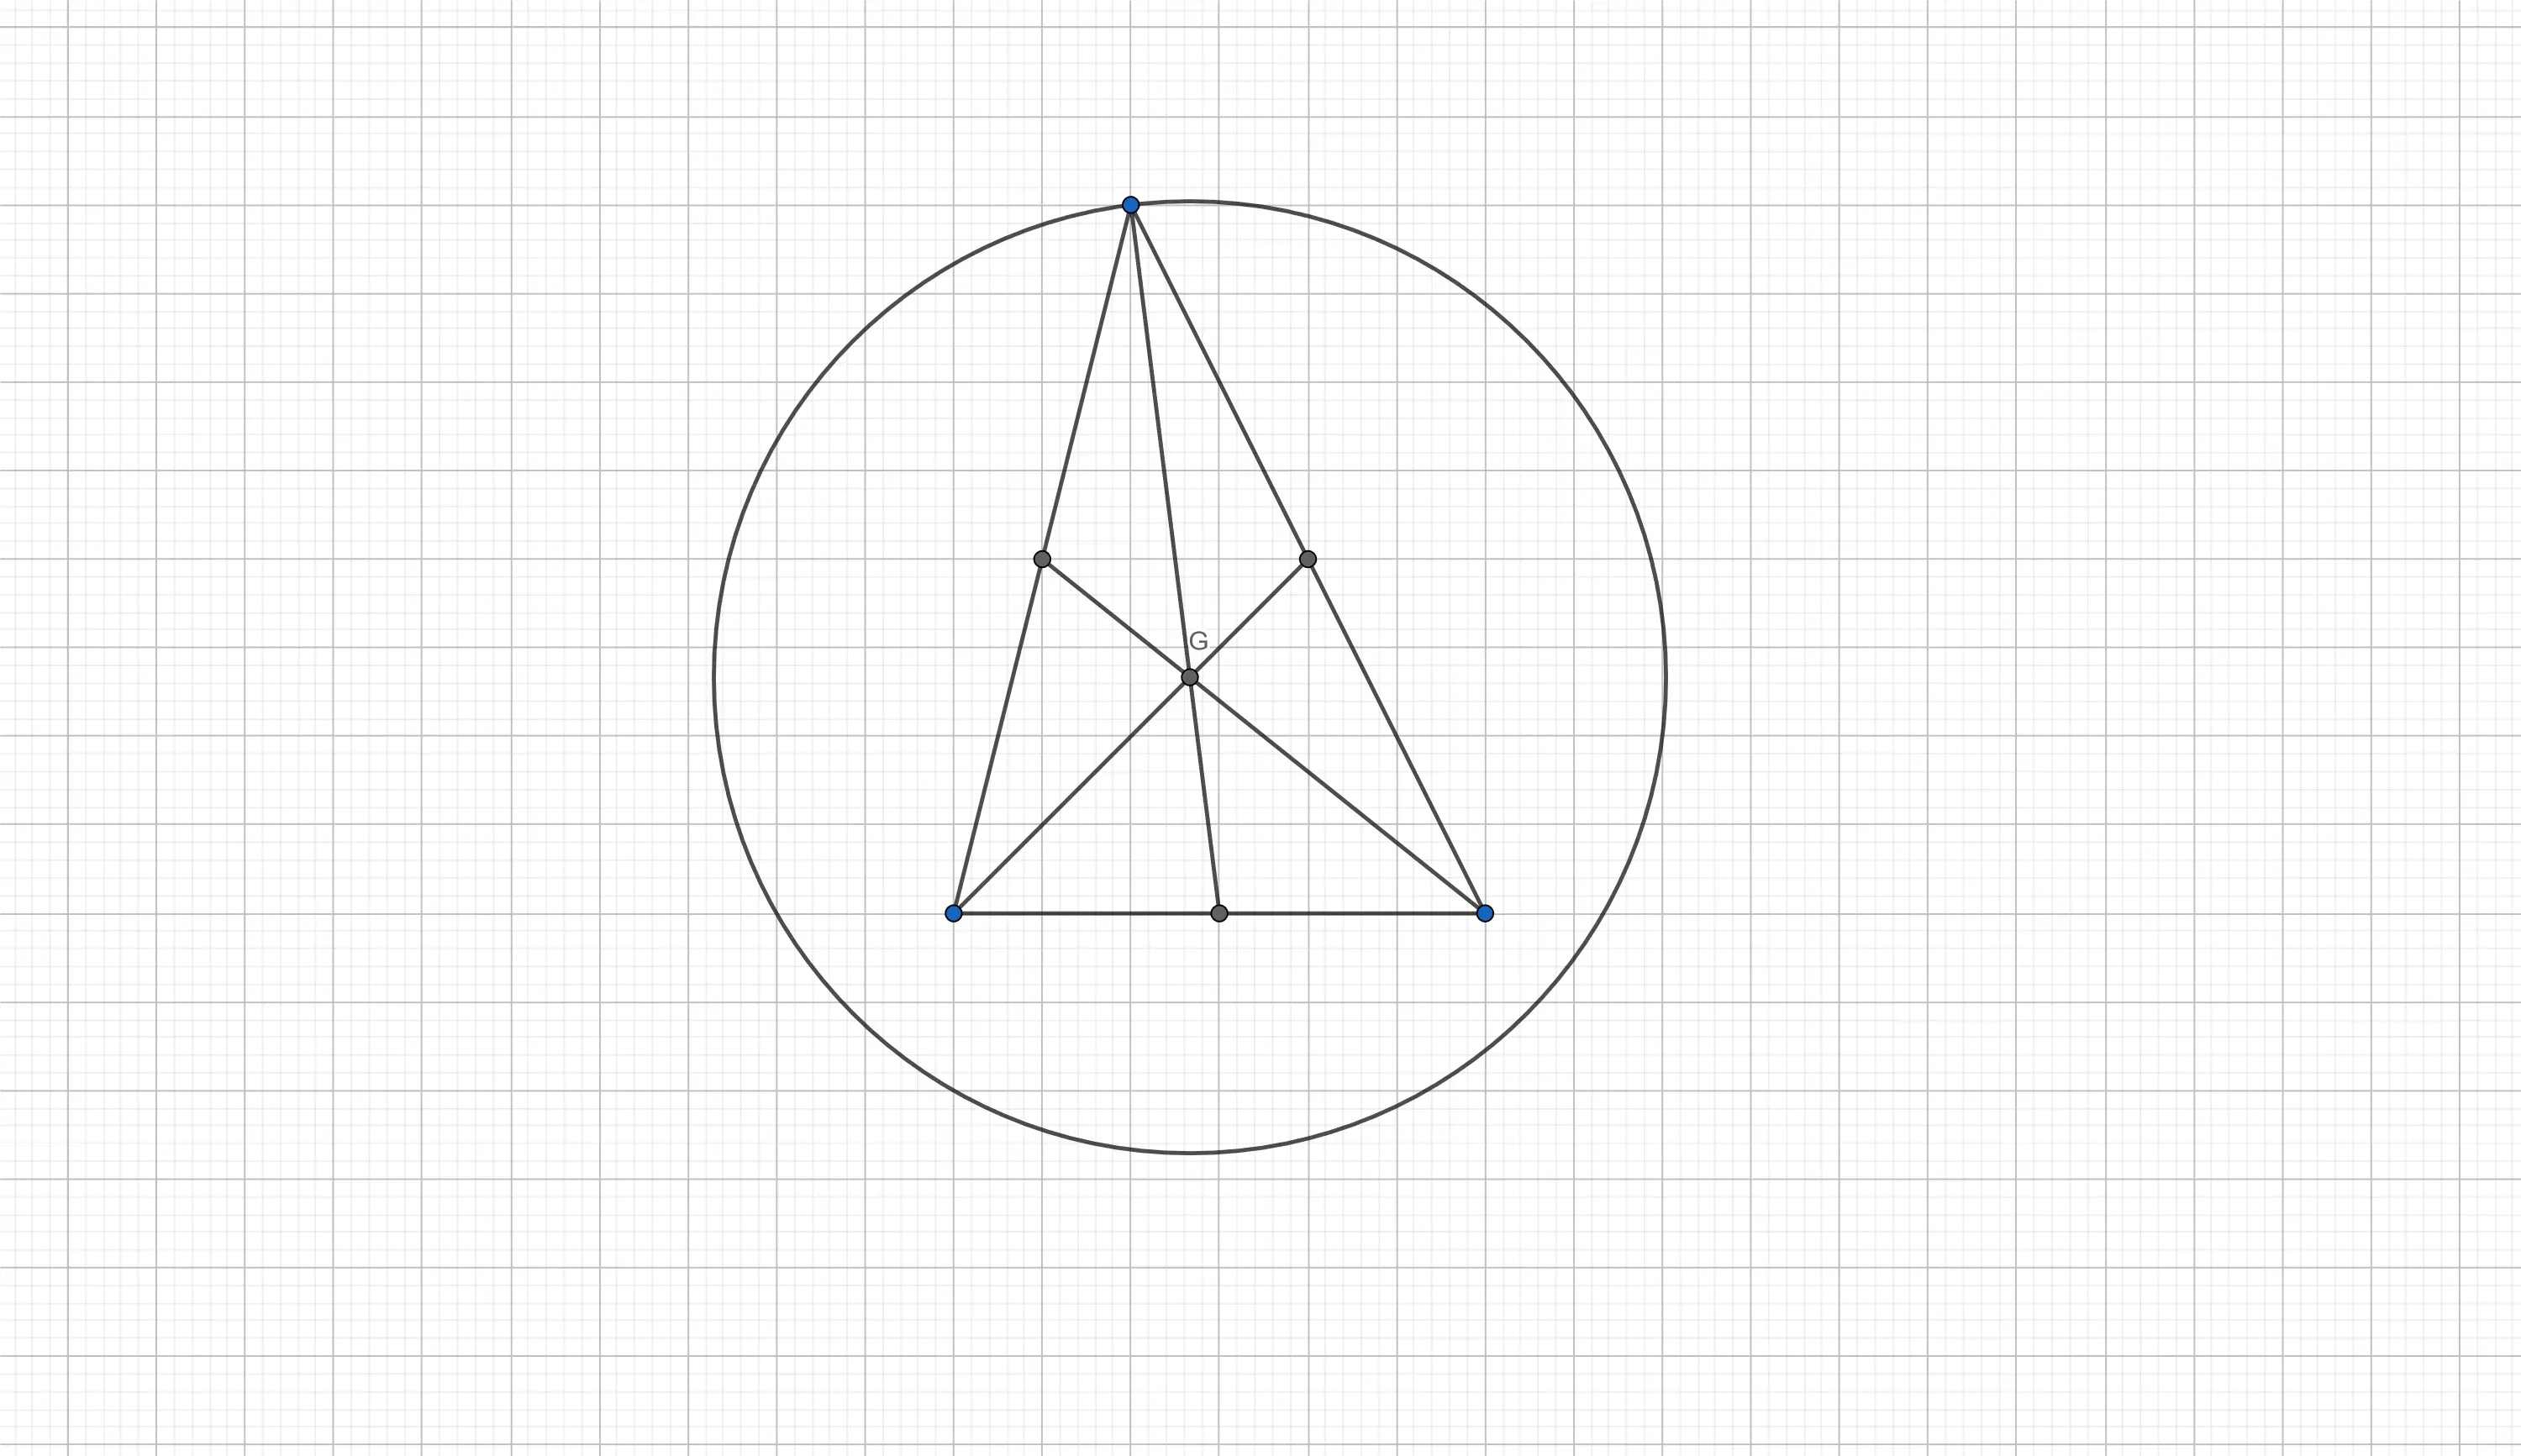 The bounding circle (largest distance) of a triangle